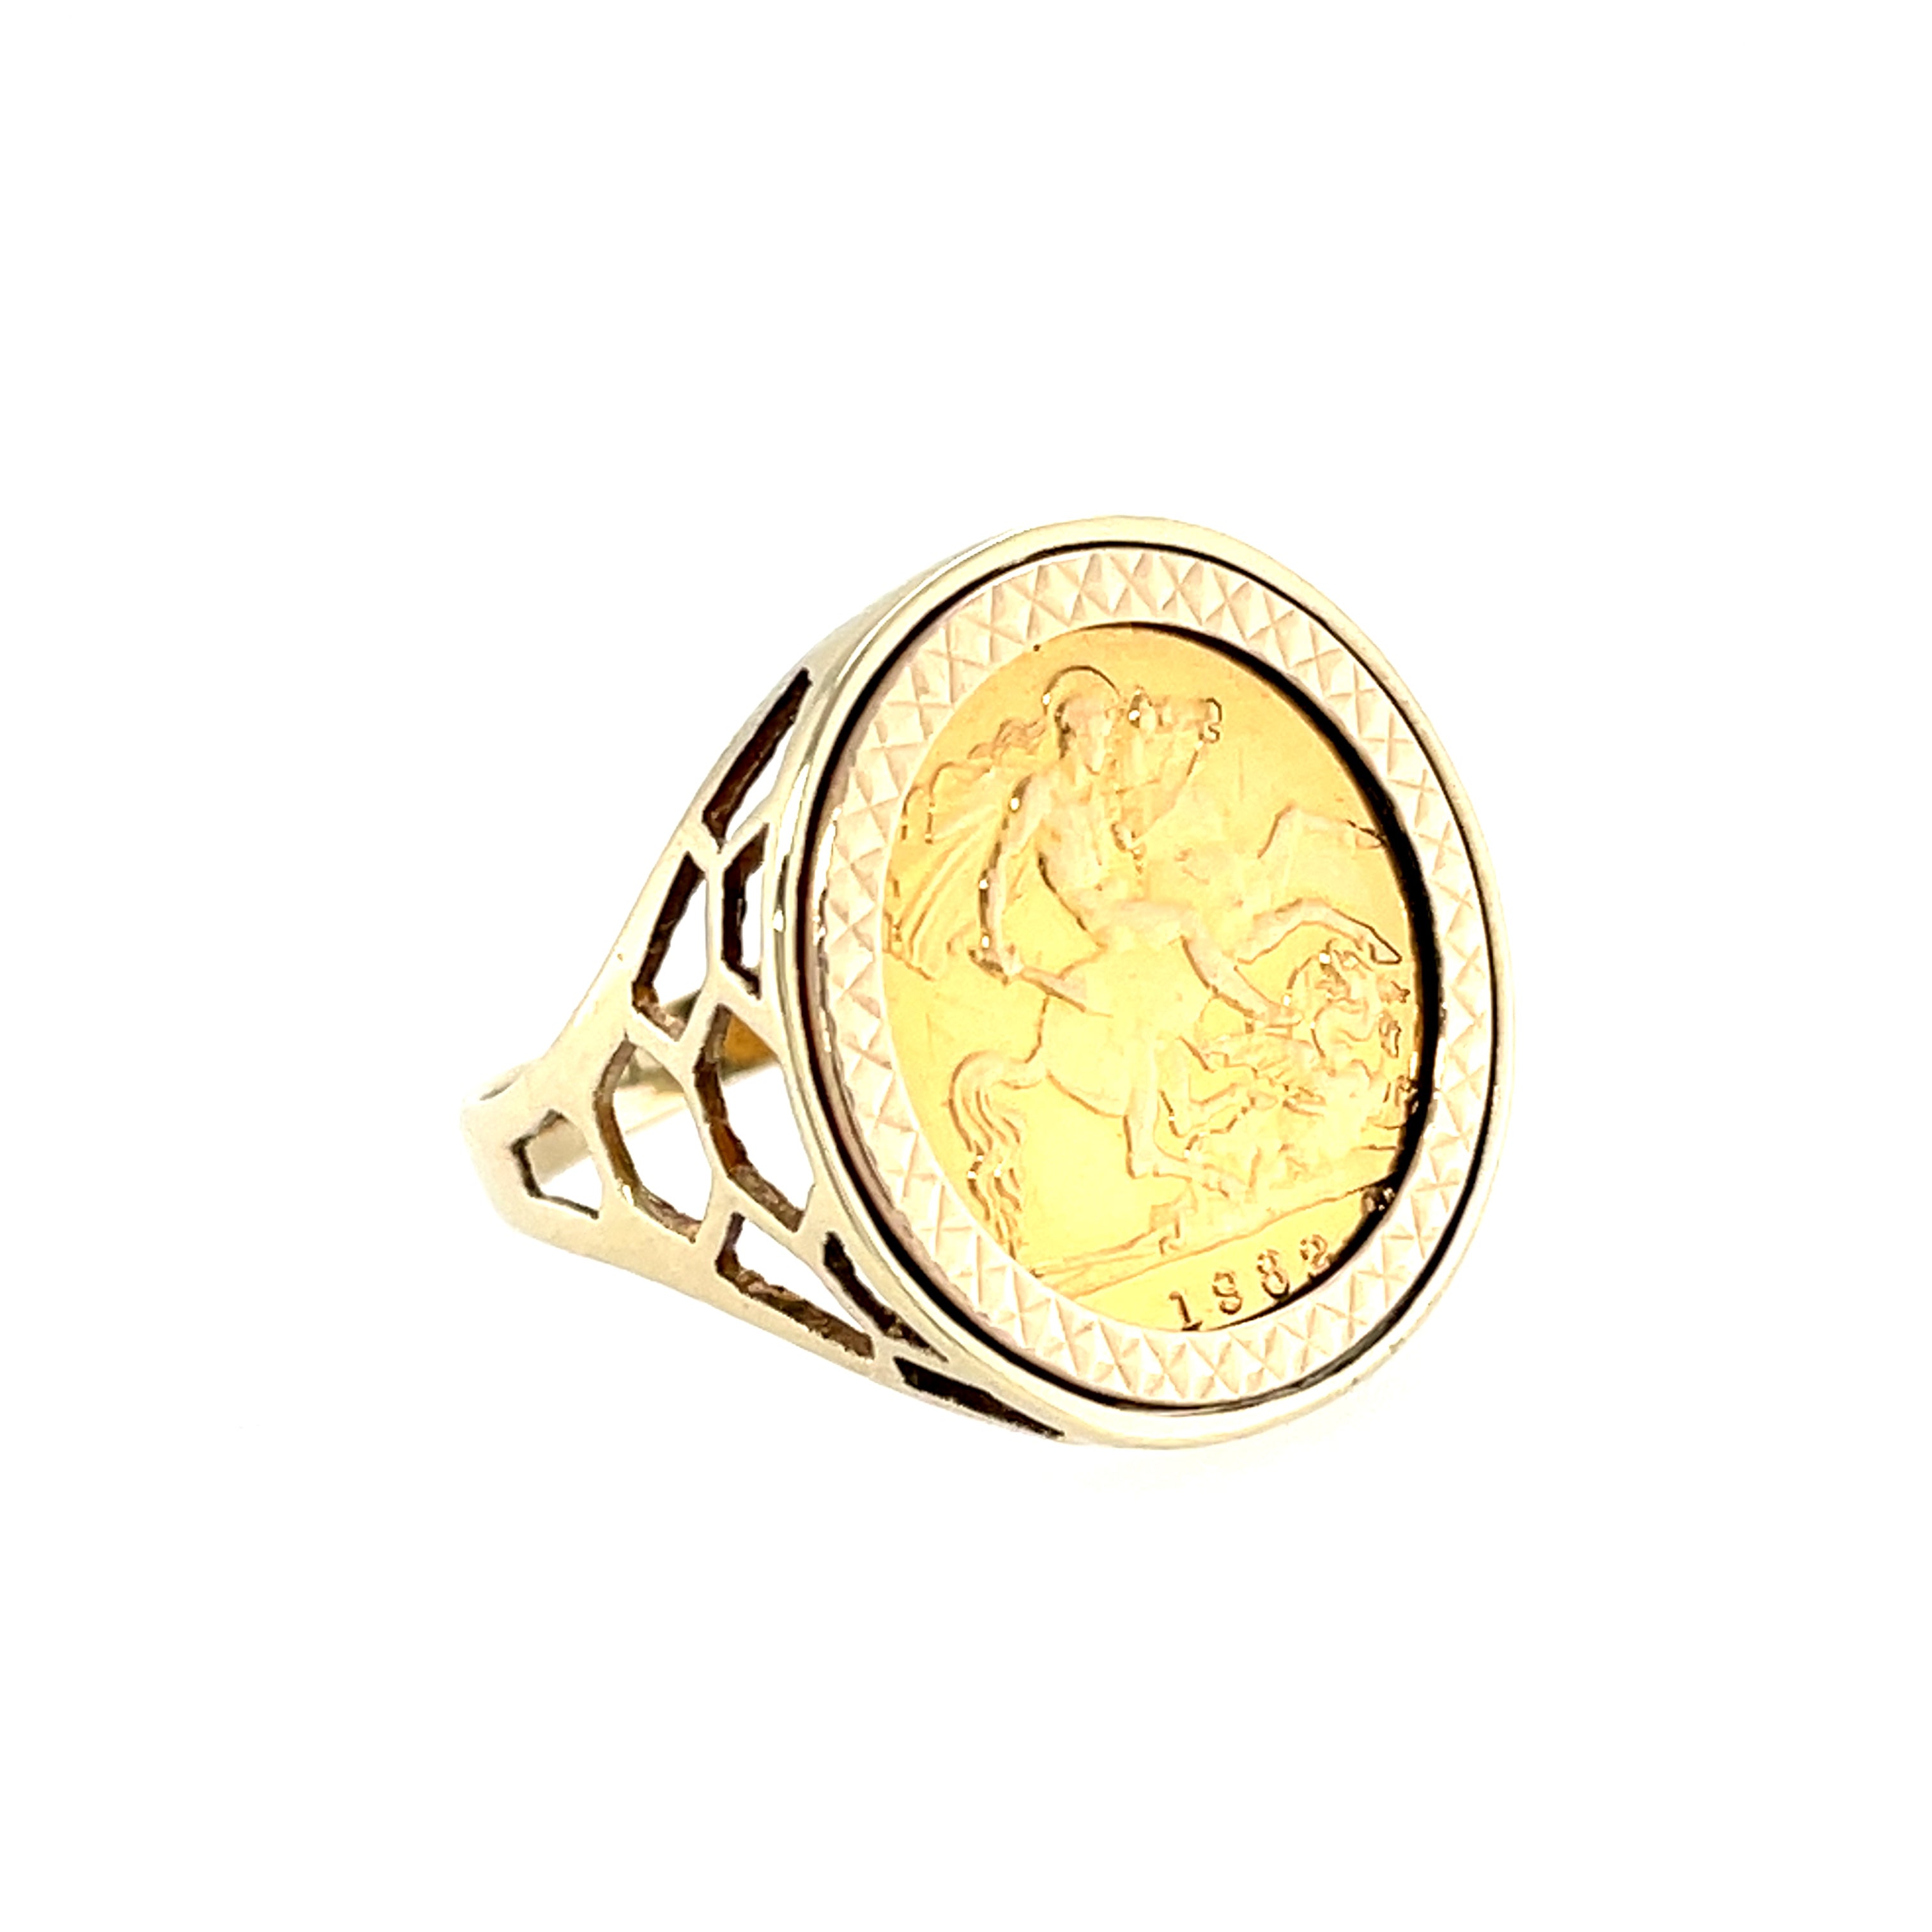 Buy Half Sovereign Ring, 1905. Size S Online in India - Etsy